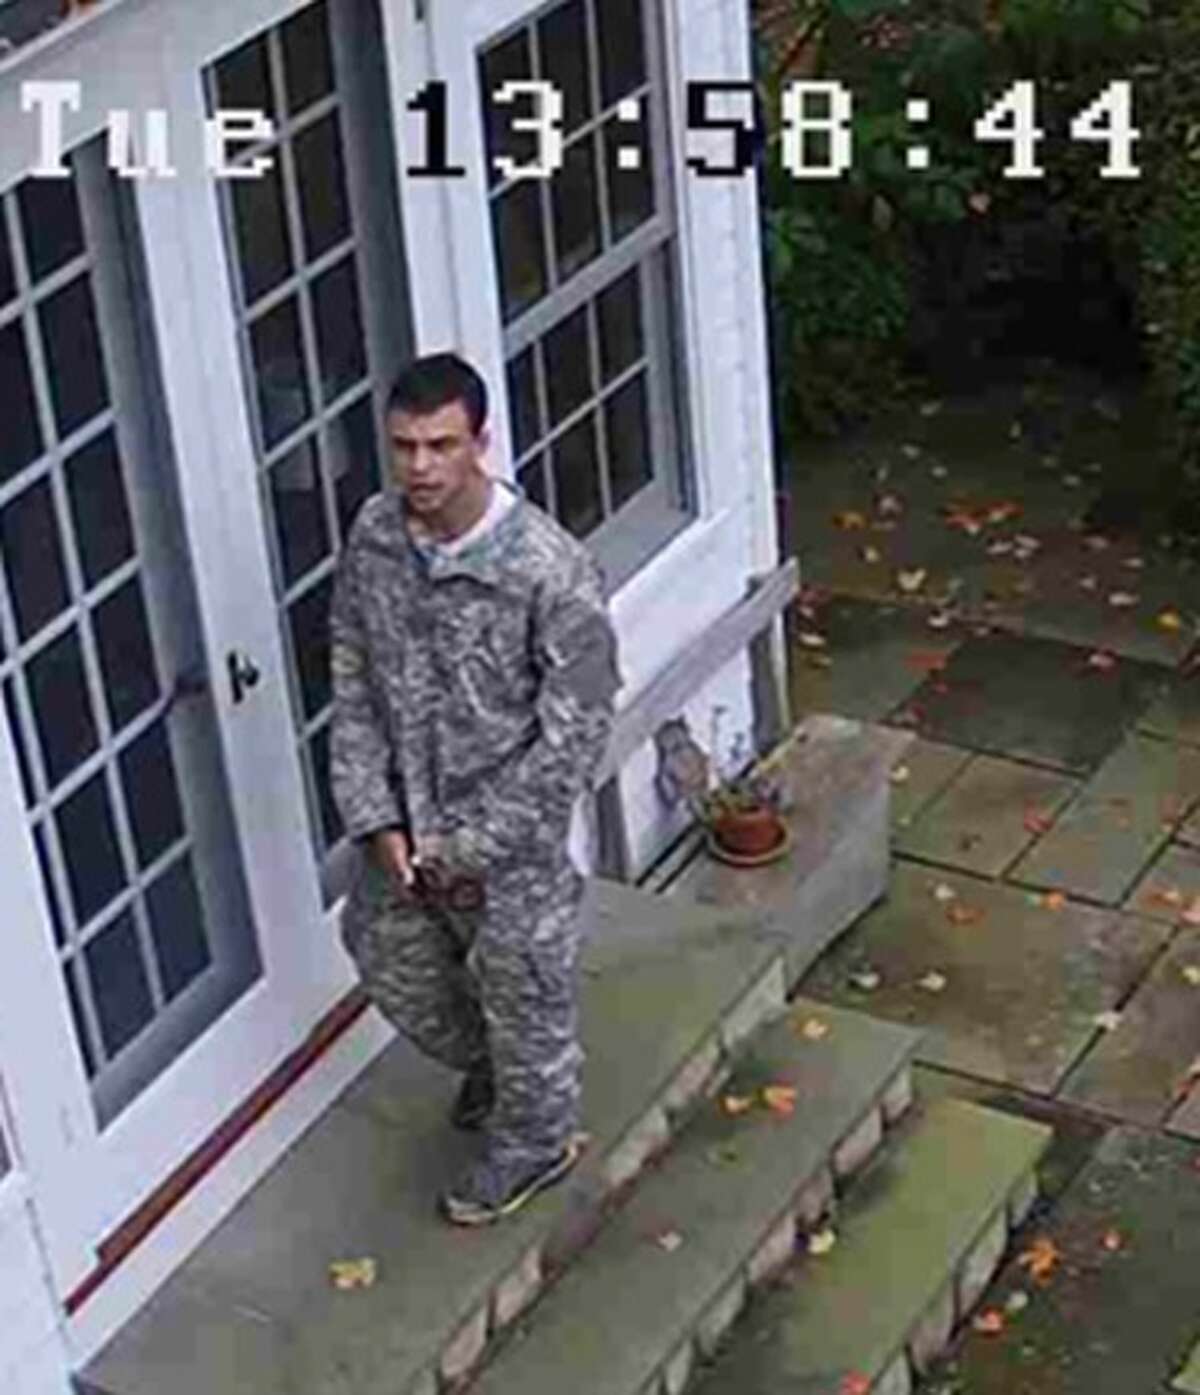 Photos from a surveillance camera show a suspect during a burglary in Roxbury on Tuesday.